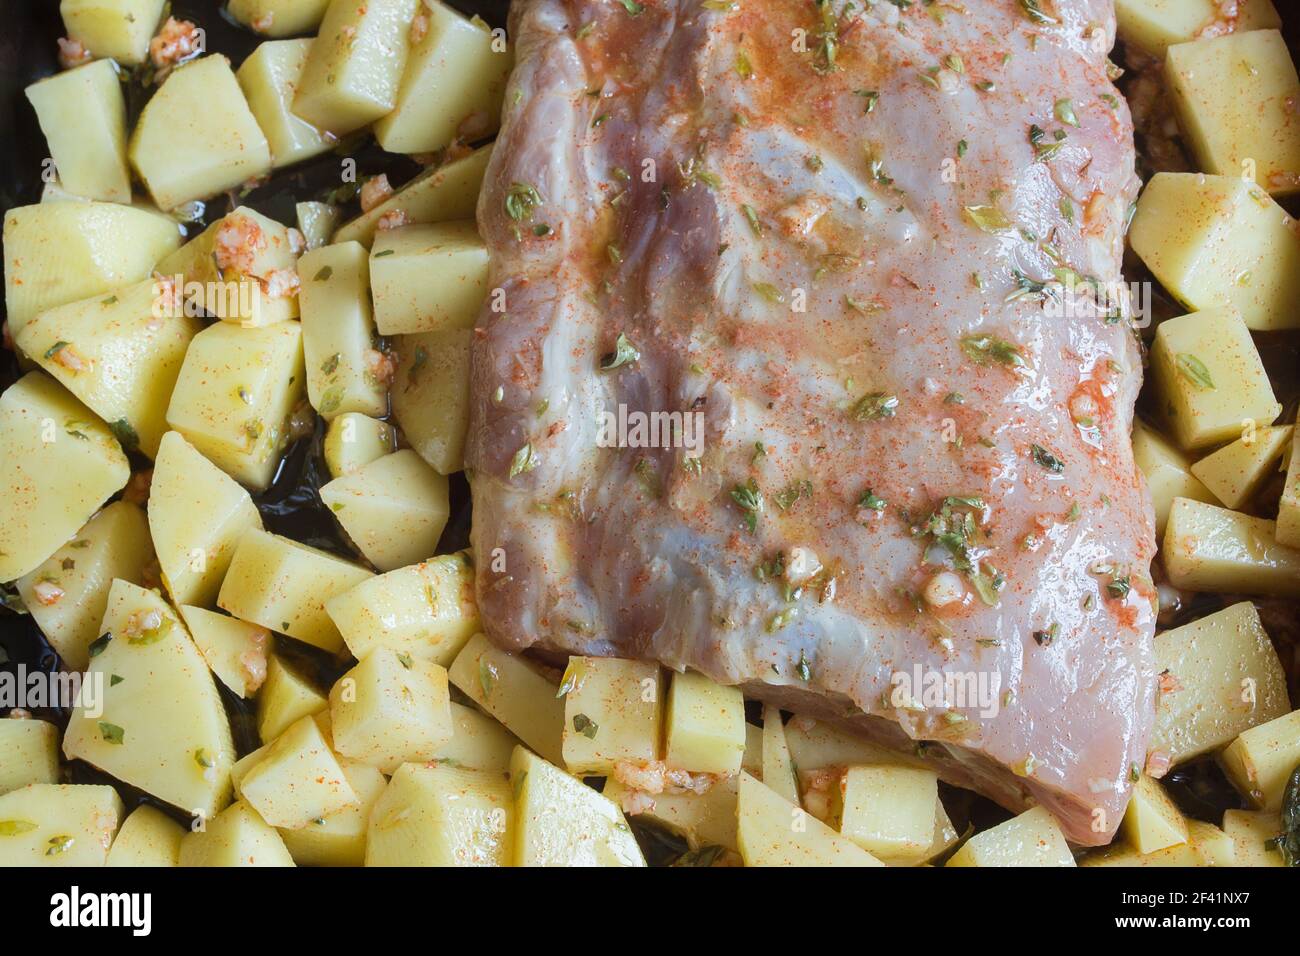 Overhead view of fresh pork ribs and potatoes cut into squares bathed in a sauce of garlic, oil, vinegar, and oregano. Fresh food and raw meats. Stock Photo